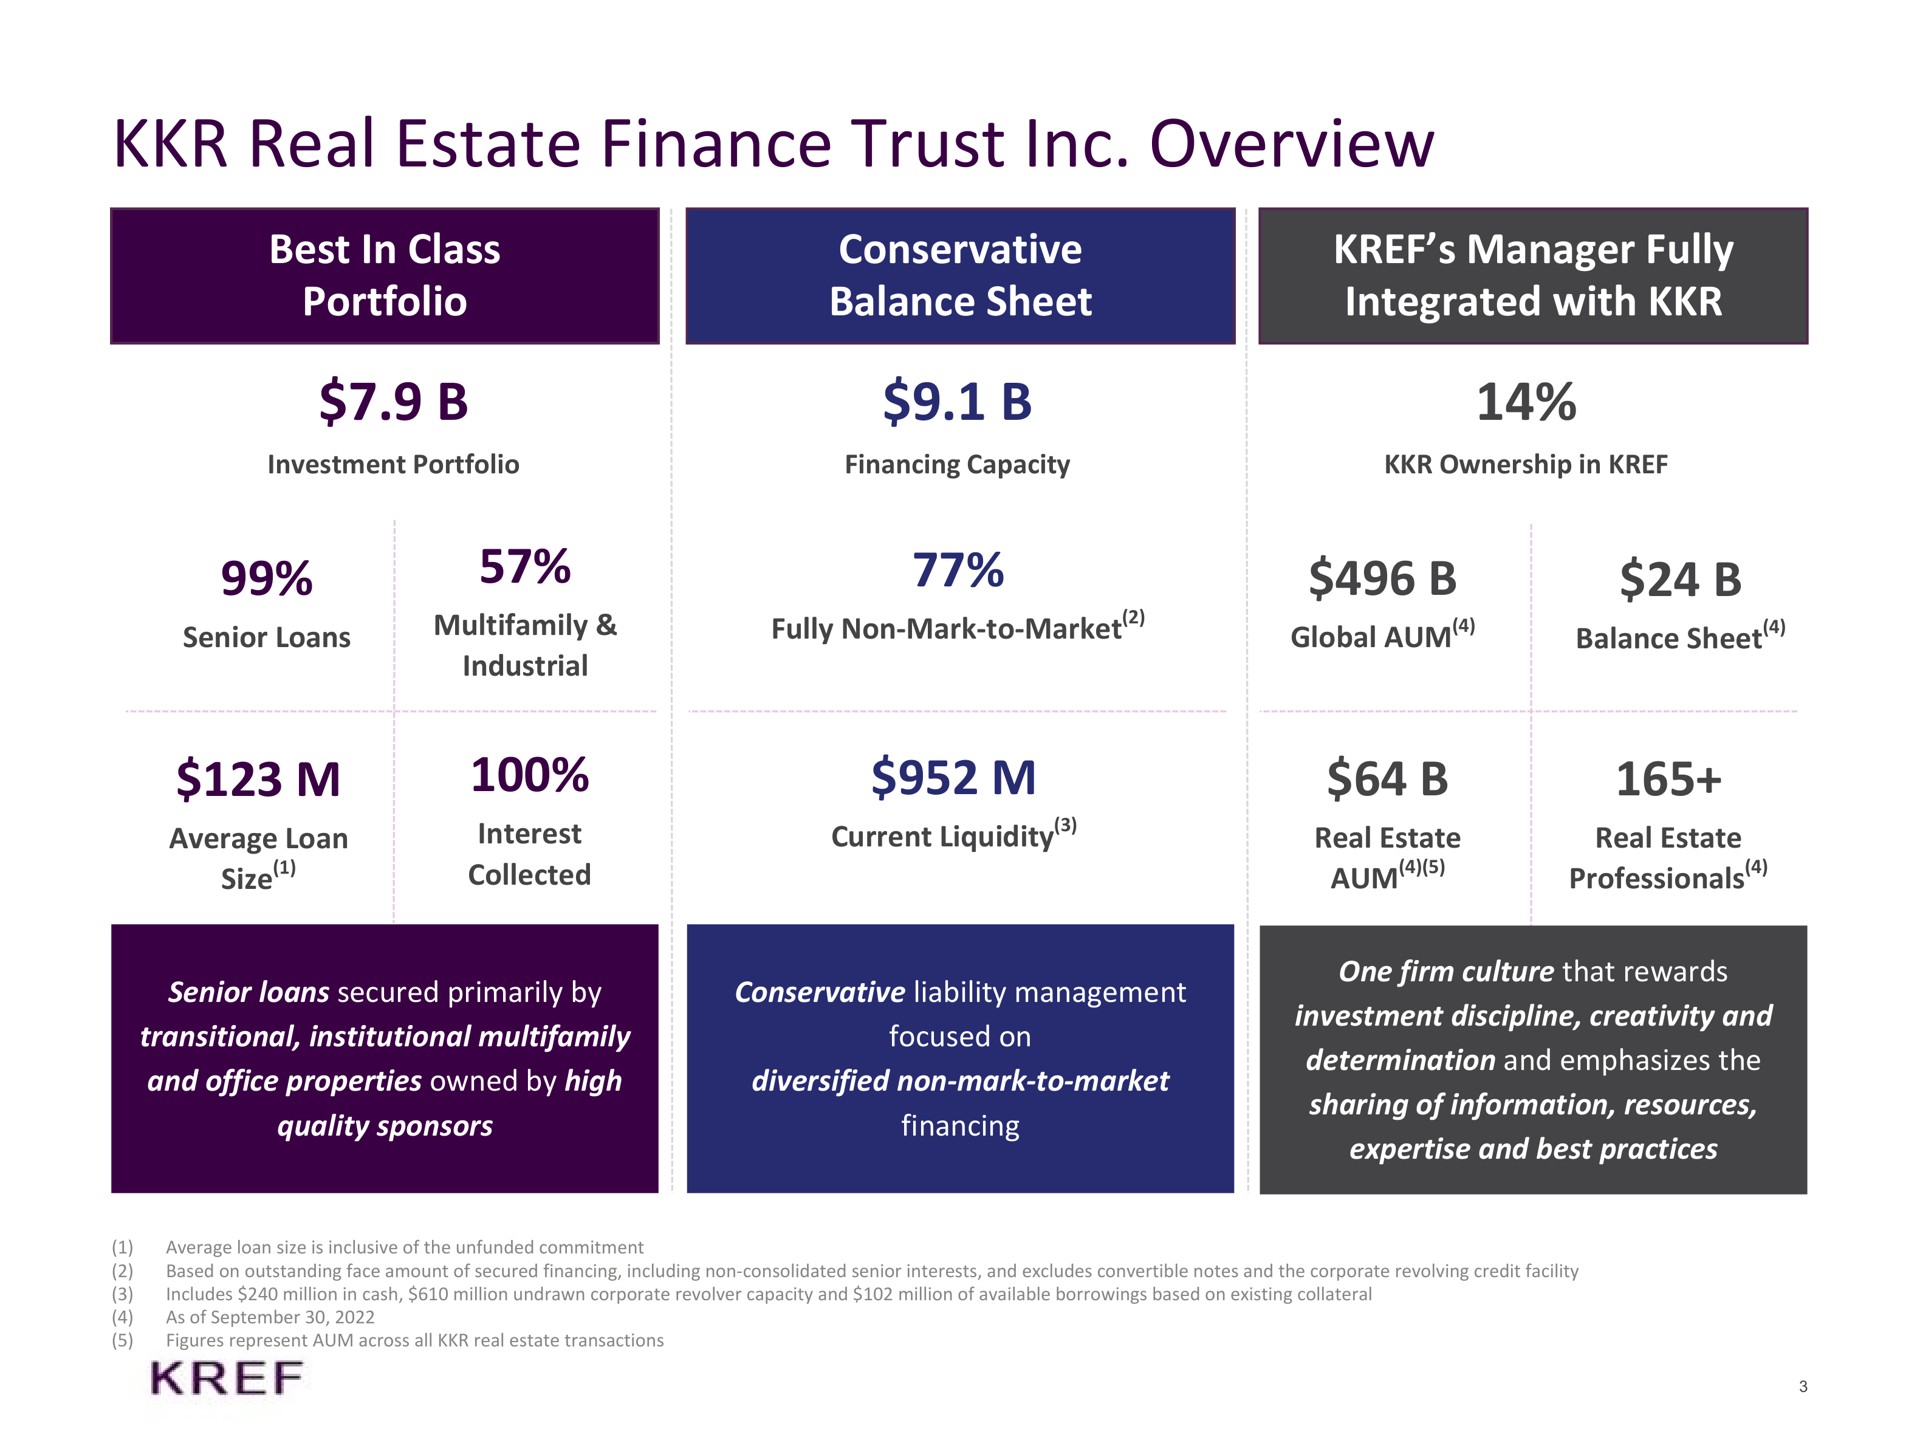 real estate finance trust overview best in class portfolio conservative balance sheet manager fully integrated with fully non mark to market global aum balance sheet senior loans industrial average loan size interest collected current liquidity senior loans secured primarily by transitional institutional and office properties owned by high quality sponsors conservative liability management focused on diversified non mark to market financing real estate real estate professionals one firm culture that rewards investment discipline creativity and determination and emphasizes the sharing of information resources and best practices mae | KKR Real Estate Finance Trust